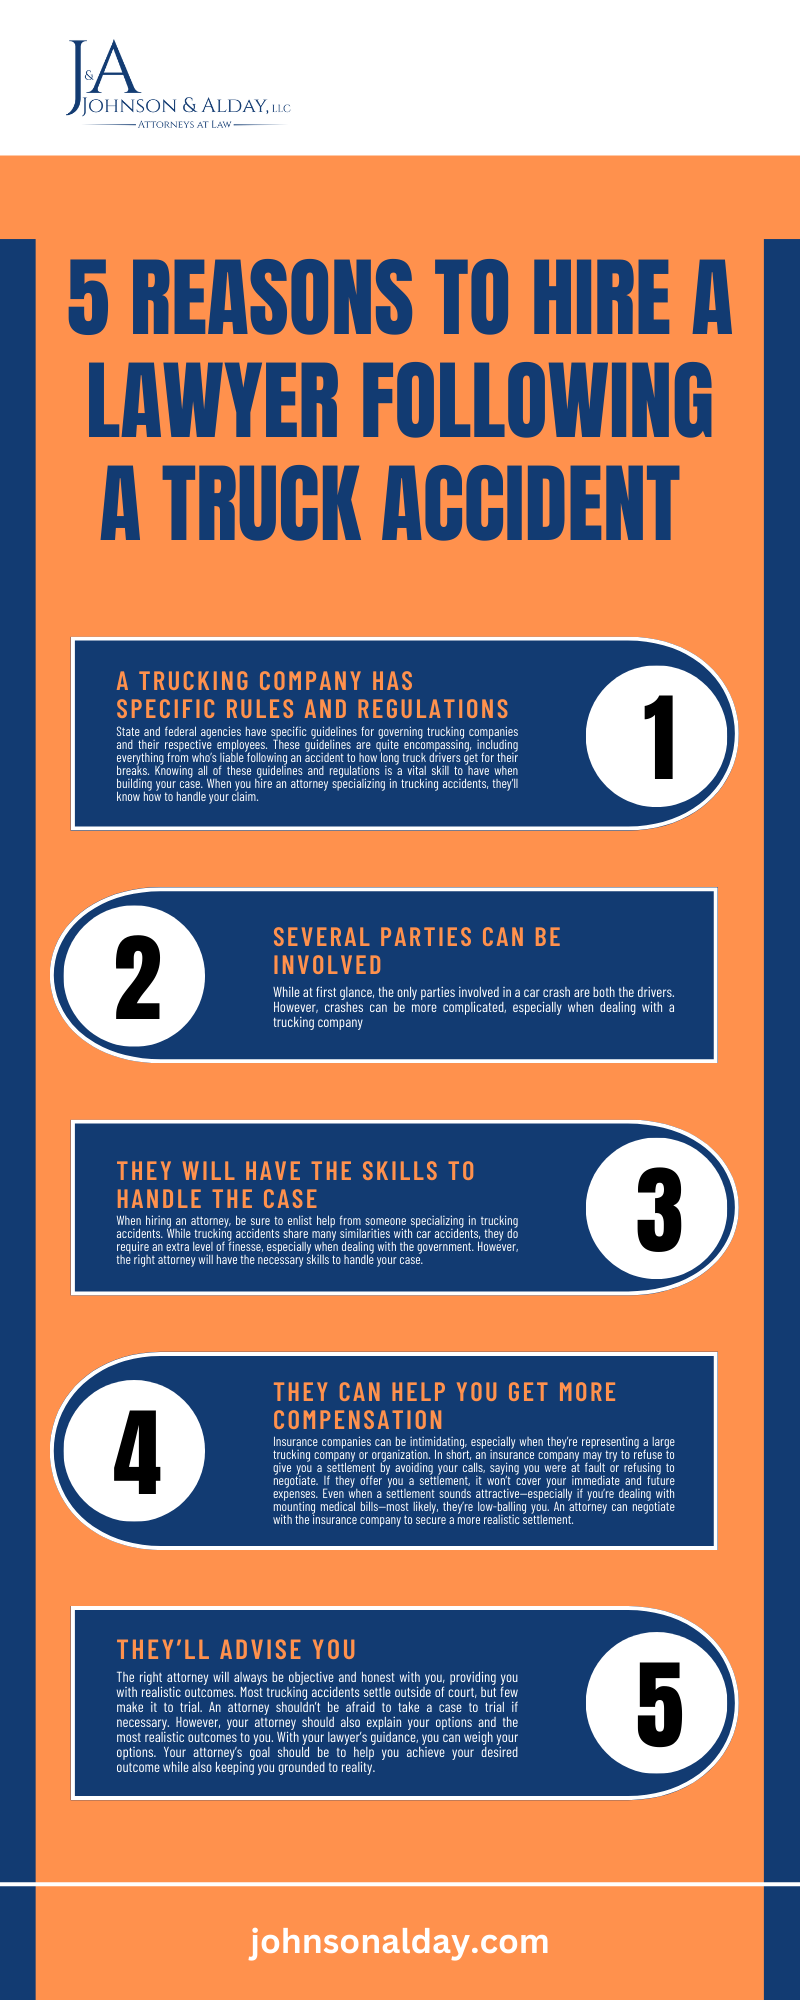 5 REASONS TO HIRE A LAWYER FOLLOWING A TRUCK ACCIDENT INFOGRAPHIC